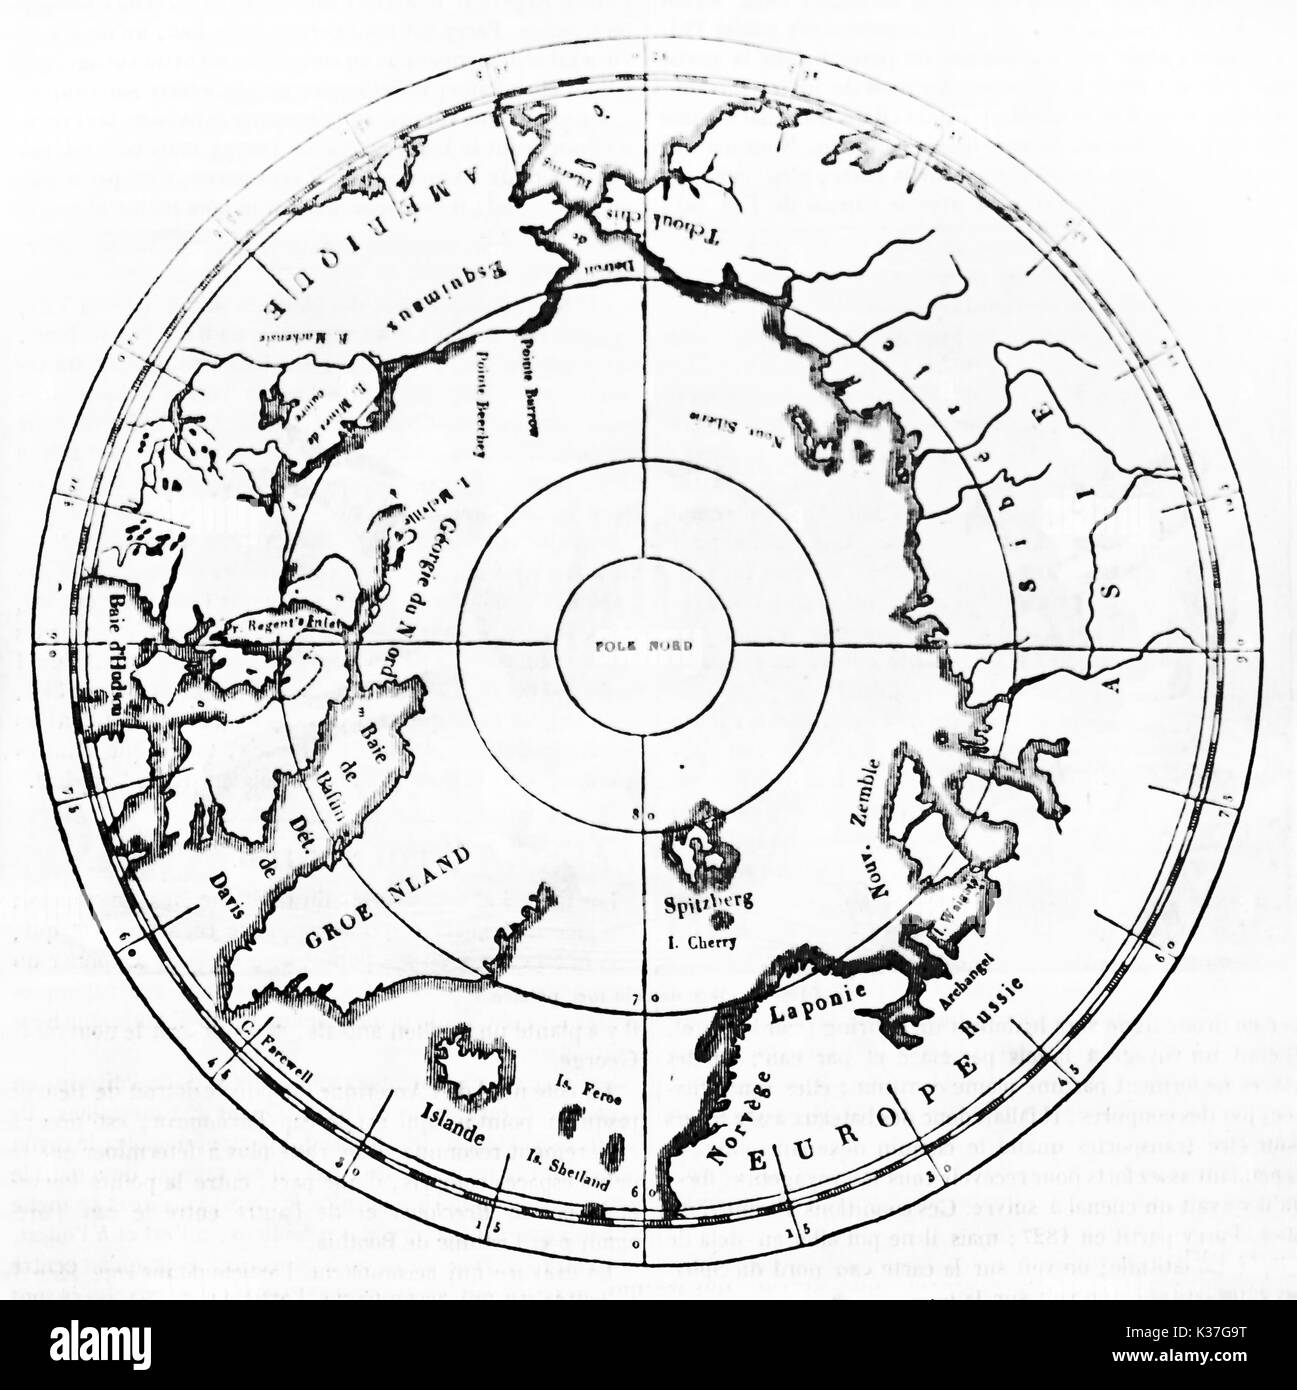 Isolated old map of North Pole. Old Illustration by unidentified author, published on Magasin Pittoresque, Paris, 1834 Stock Photo